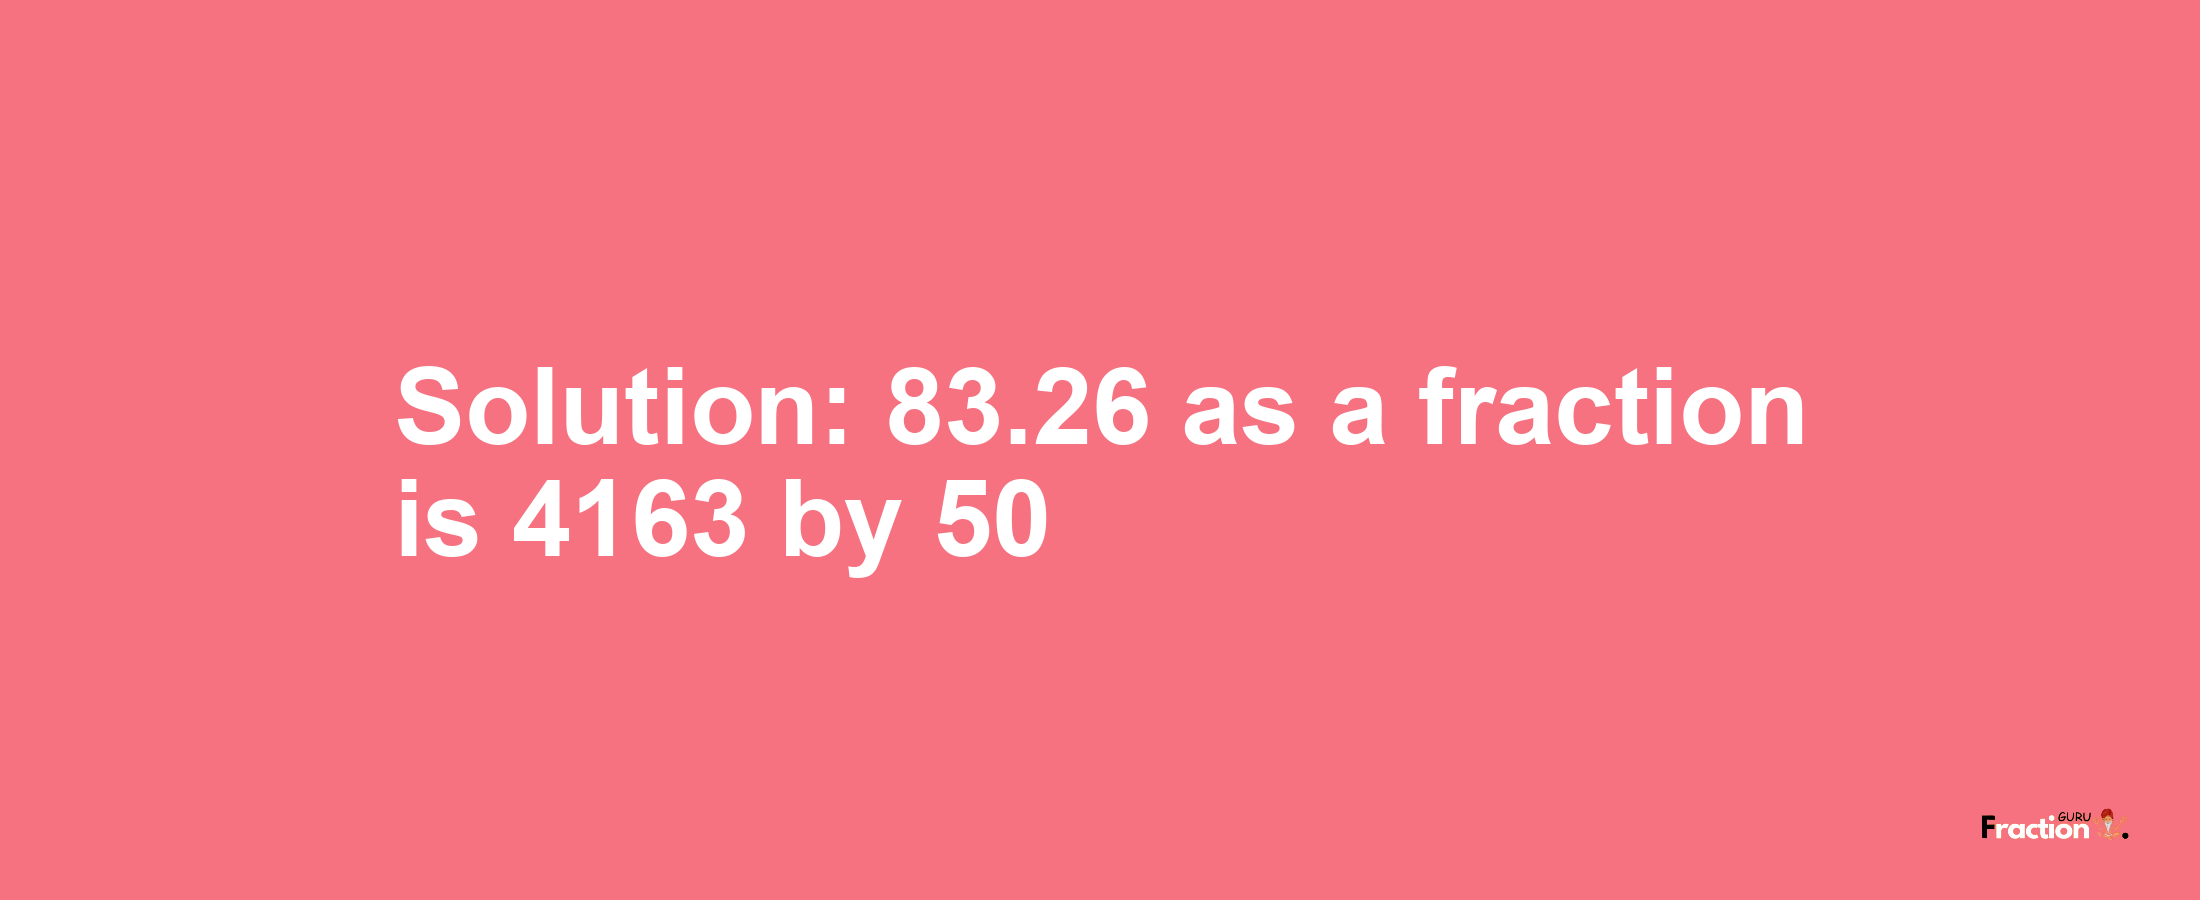 Solution:83.26 as a fraction is 4163/50